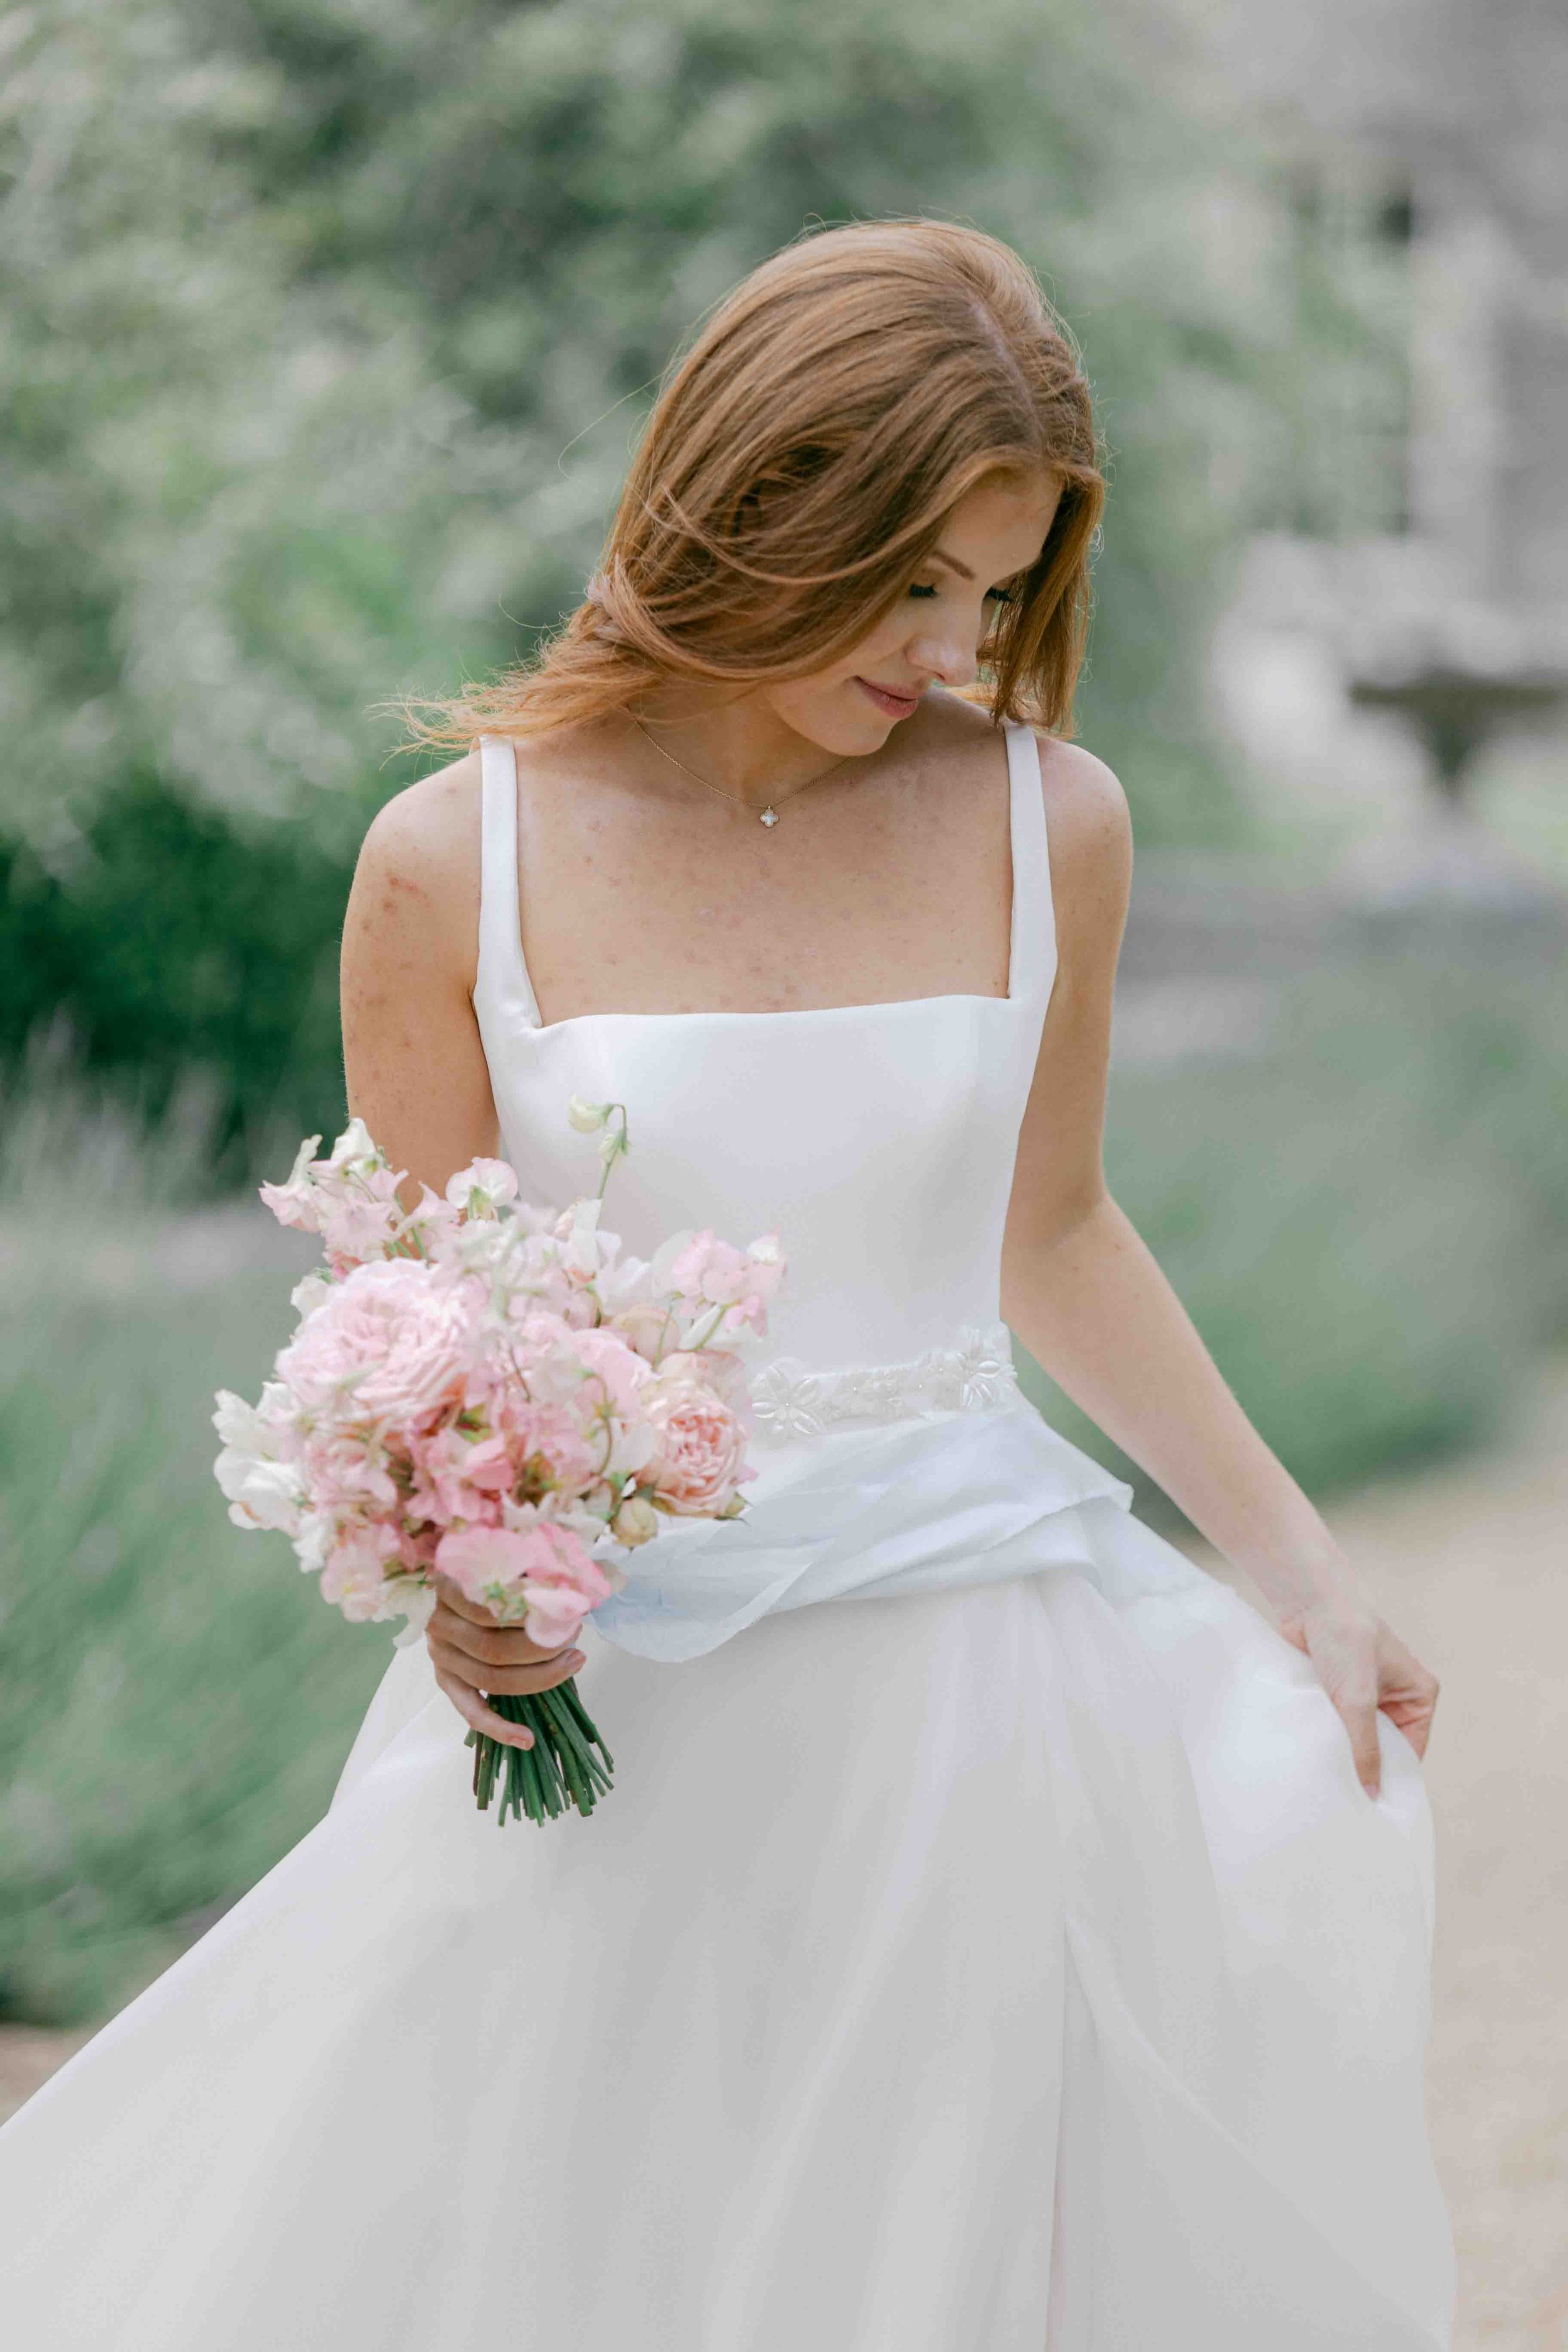  bride holding dress and flower bouquet 